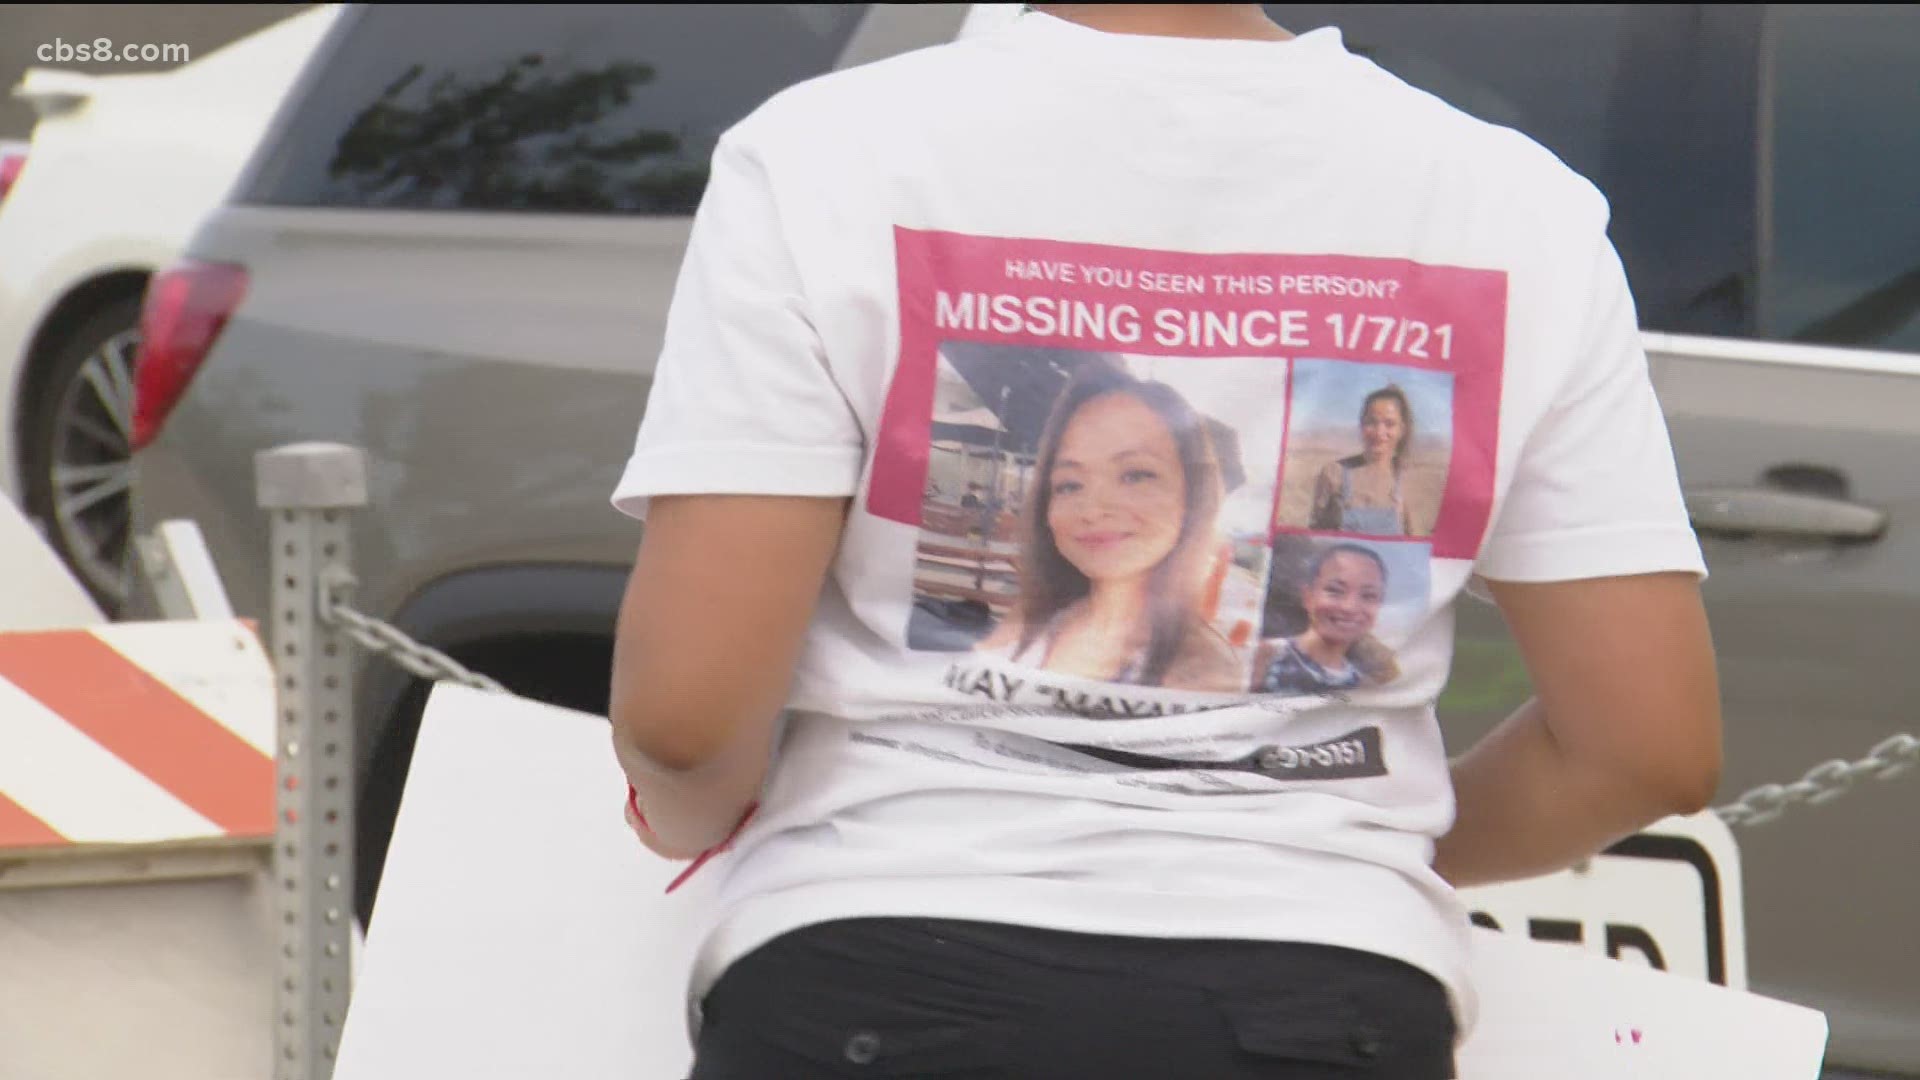 On Saturday, Maya Millete's sister and members of "Team Maya Search" came out to Downtown San Diego to rally and keep her name in the spotlight.